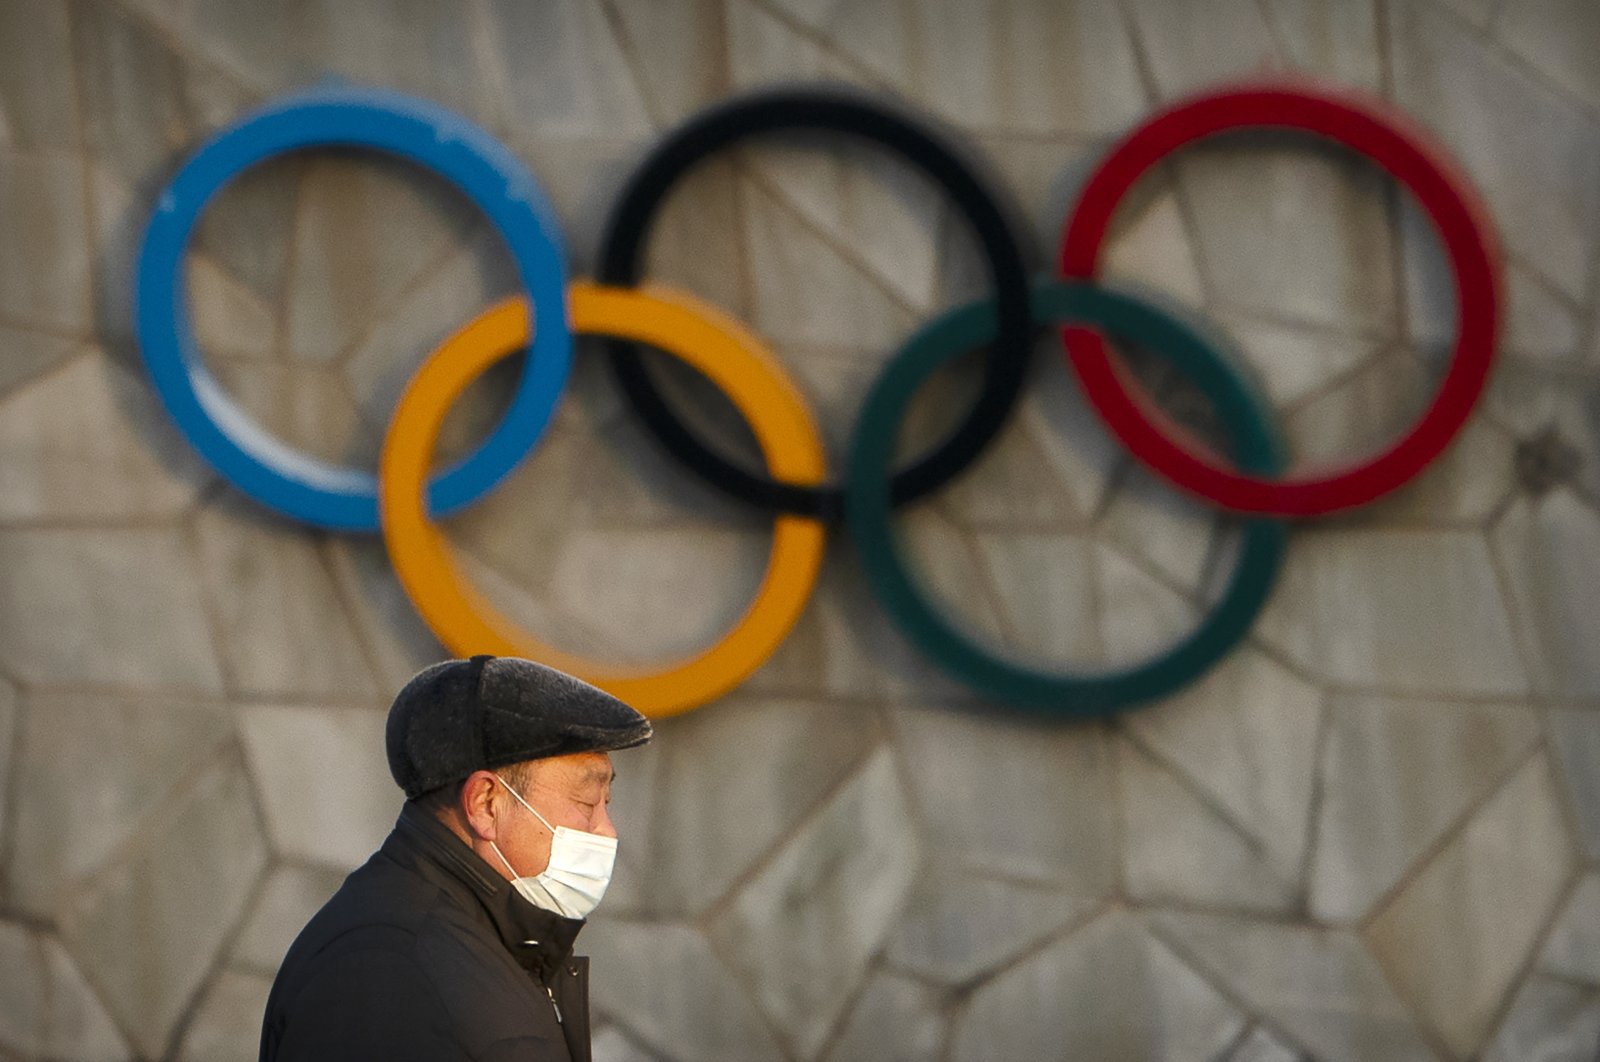 A man walks past the Olympic rings on the exterior of the National Stadium, which will be a venue for the upcoming 2022 Winter Olympics, in Beijing, China, Feb. 2, 2021. (AP Photo)